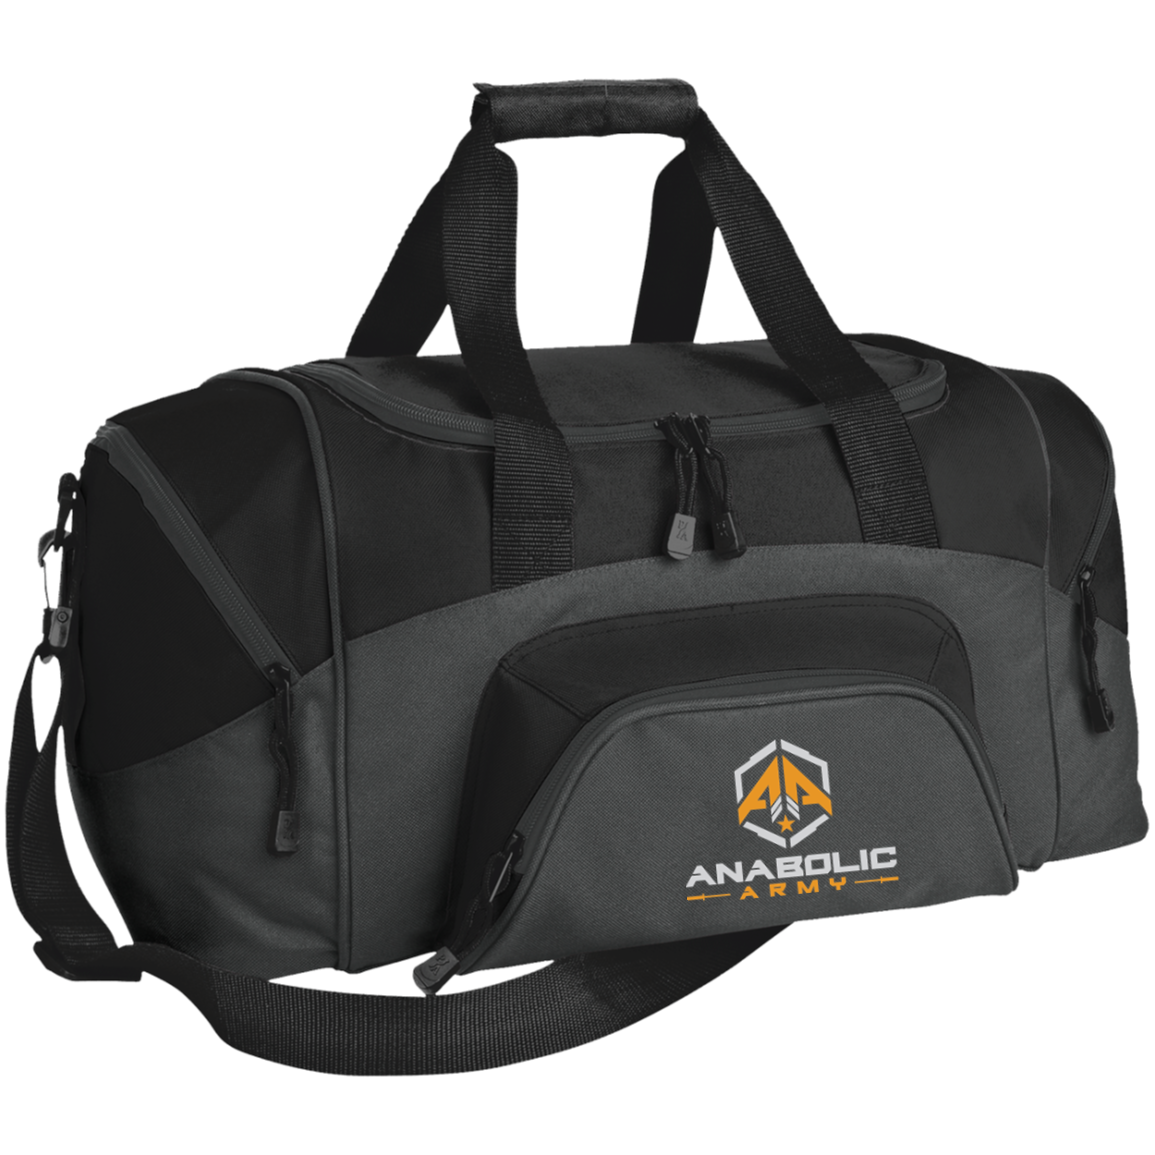 Anabolic Army Small Colorblock Sport Duffel Bag - The Anabolic Army